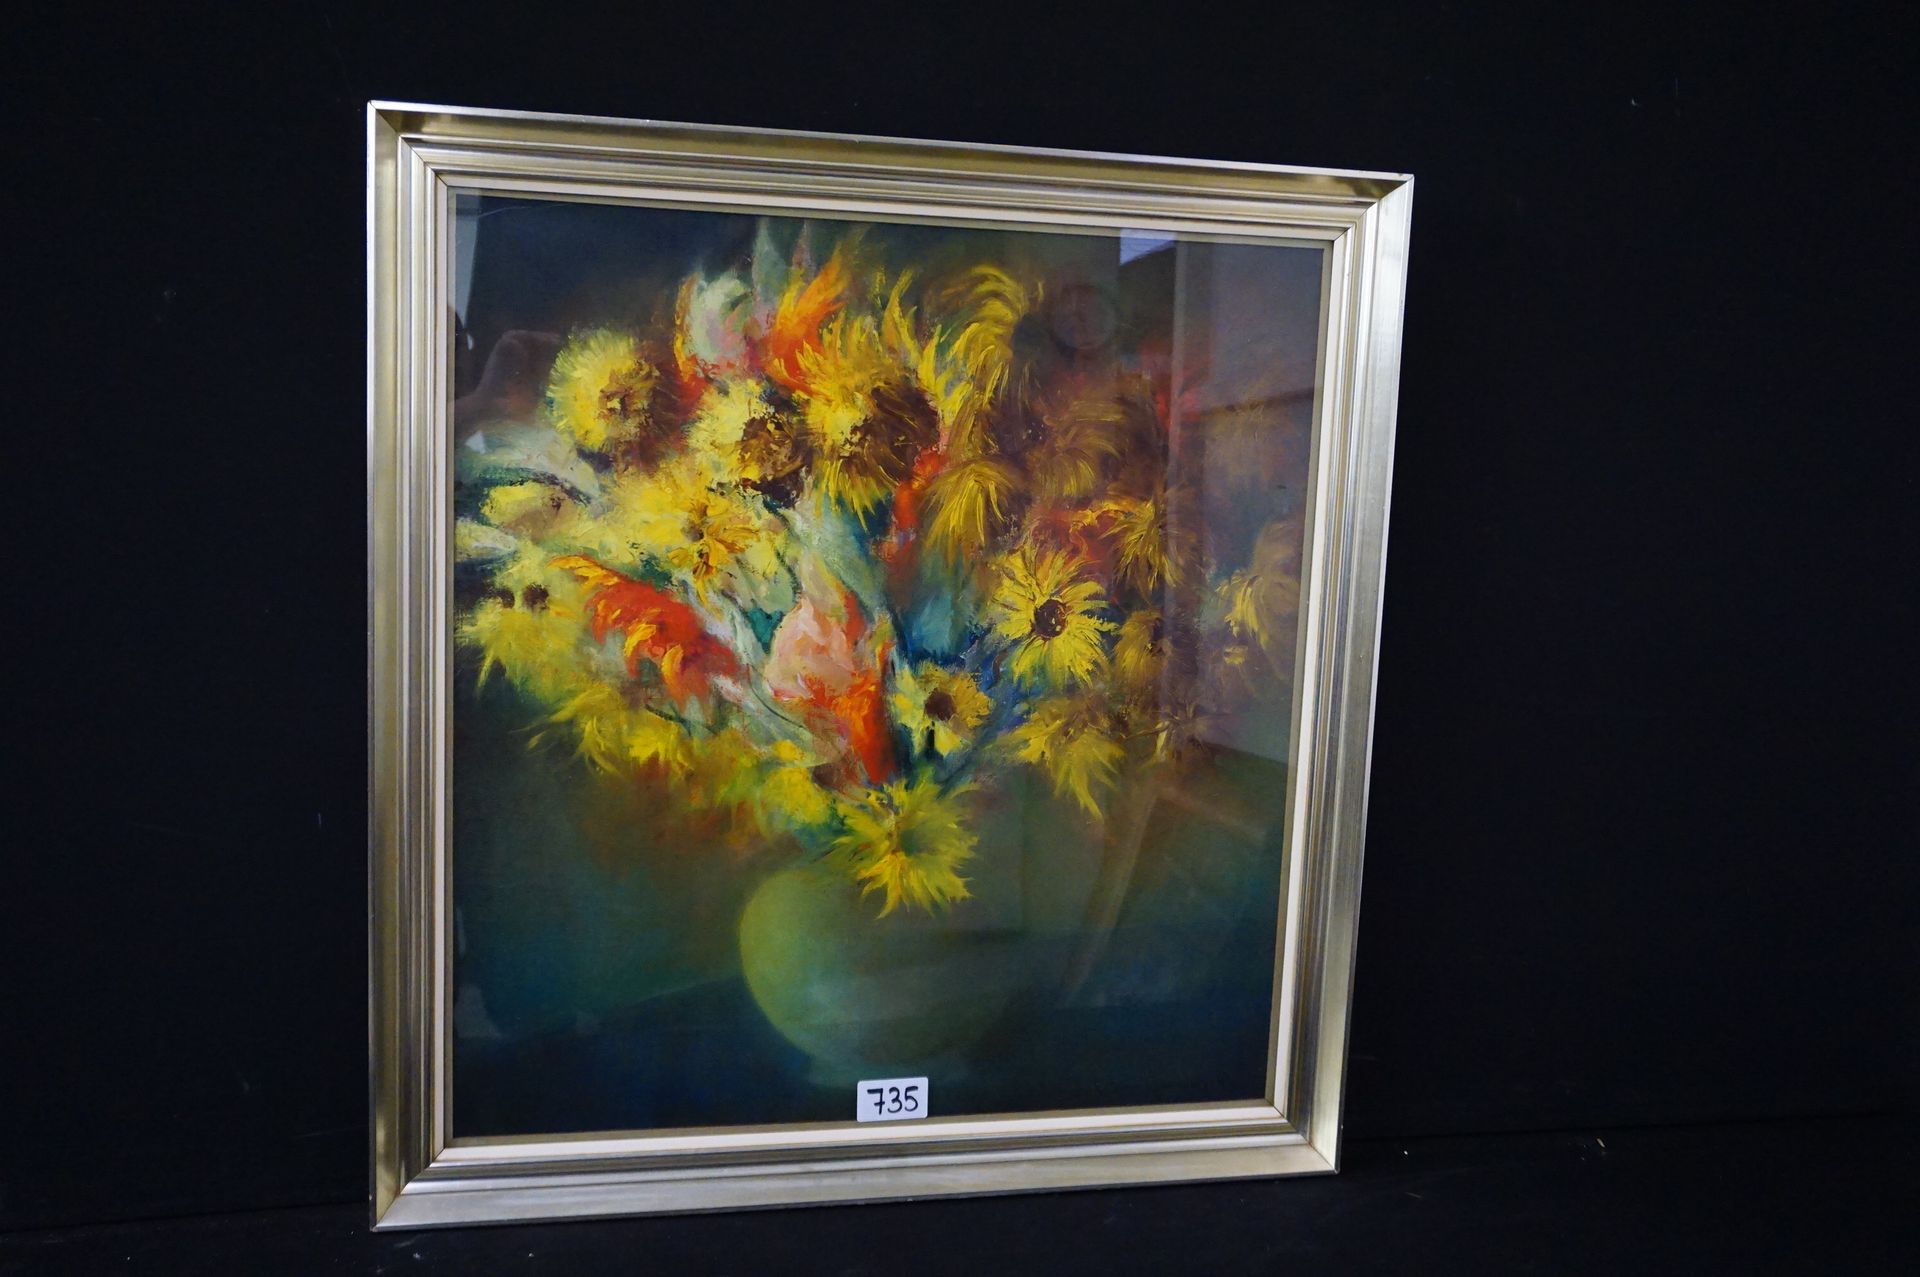 LODE VAN VAERNEWIJCK "Still life with flowers" - Oil on canvas - Signed and date&hellip;